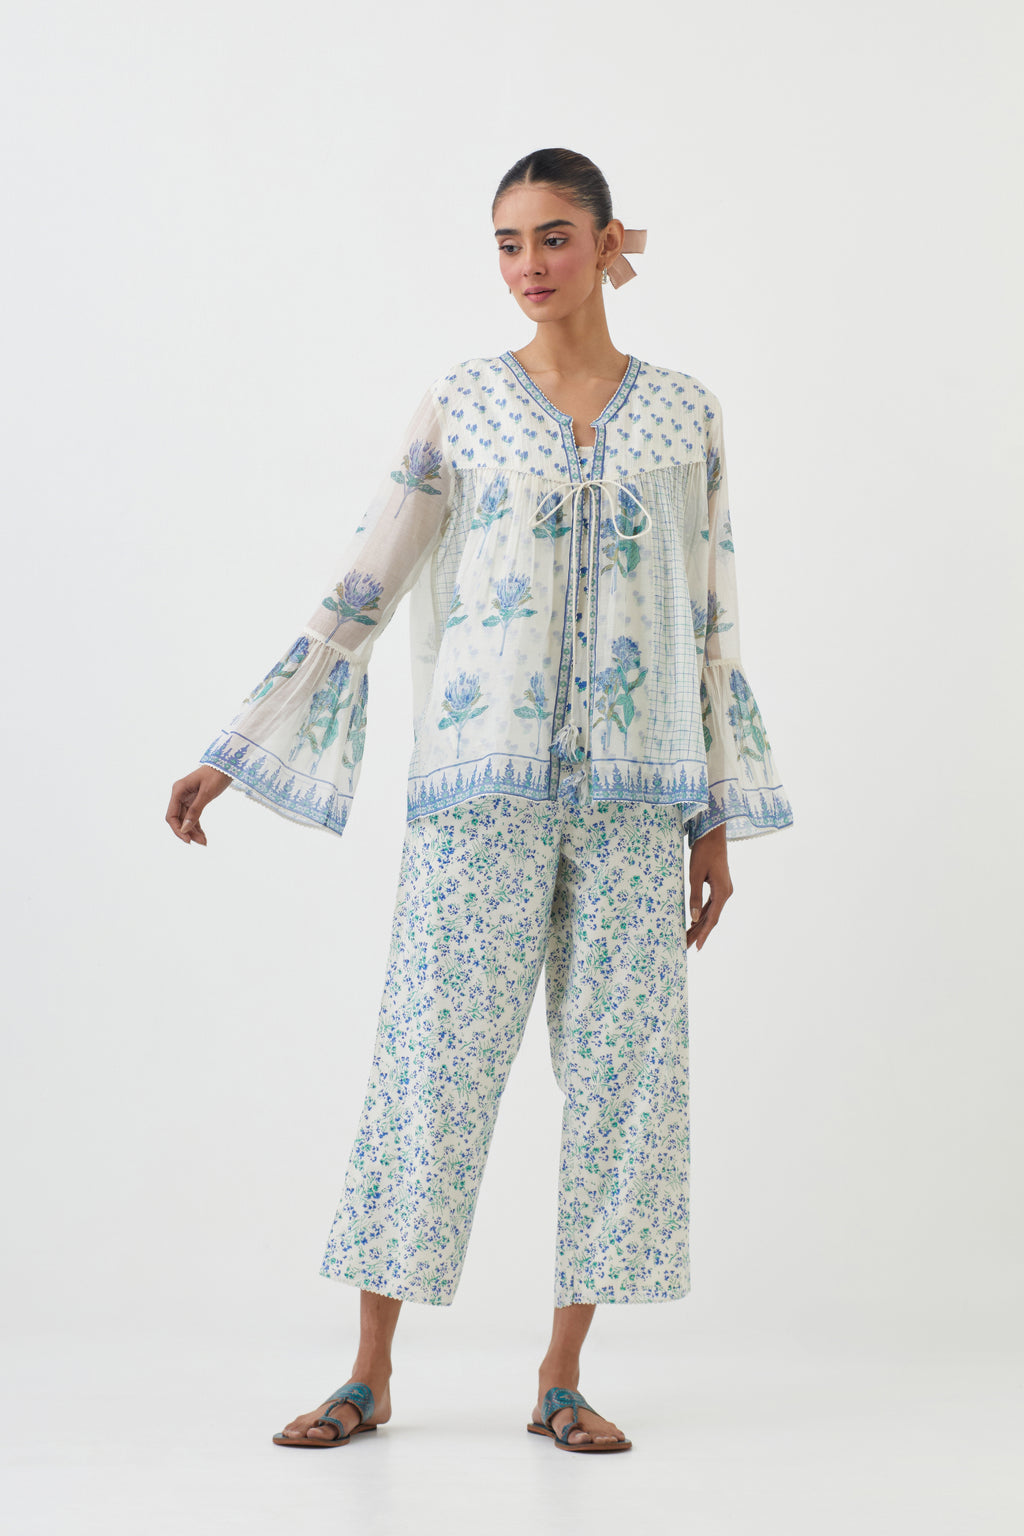 Blue hand block printed short top with hand block printed cotton slip inside, paired with off white hand block printed Cotton ankle length straight pants with all-over blue colored flower.